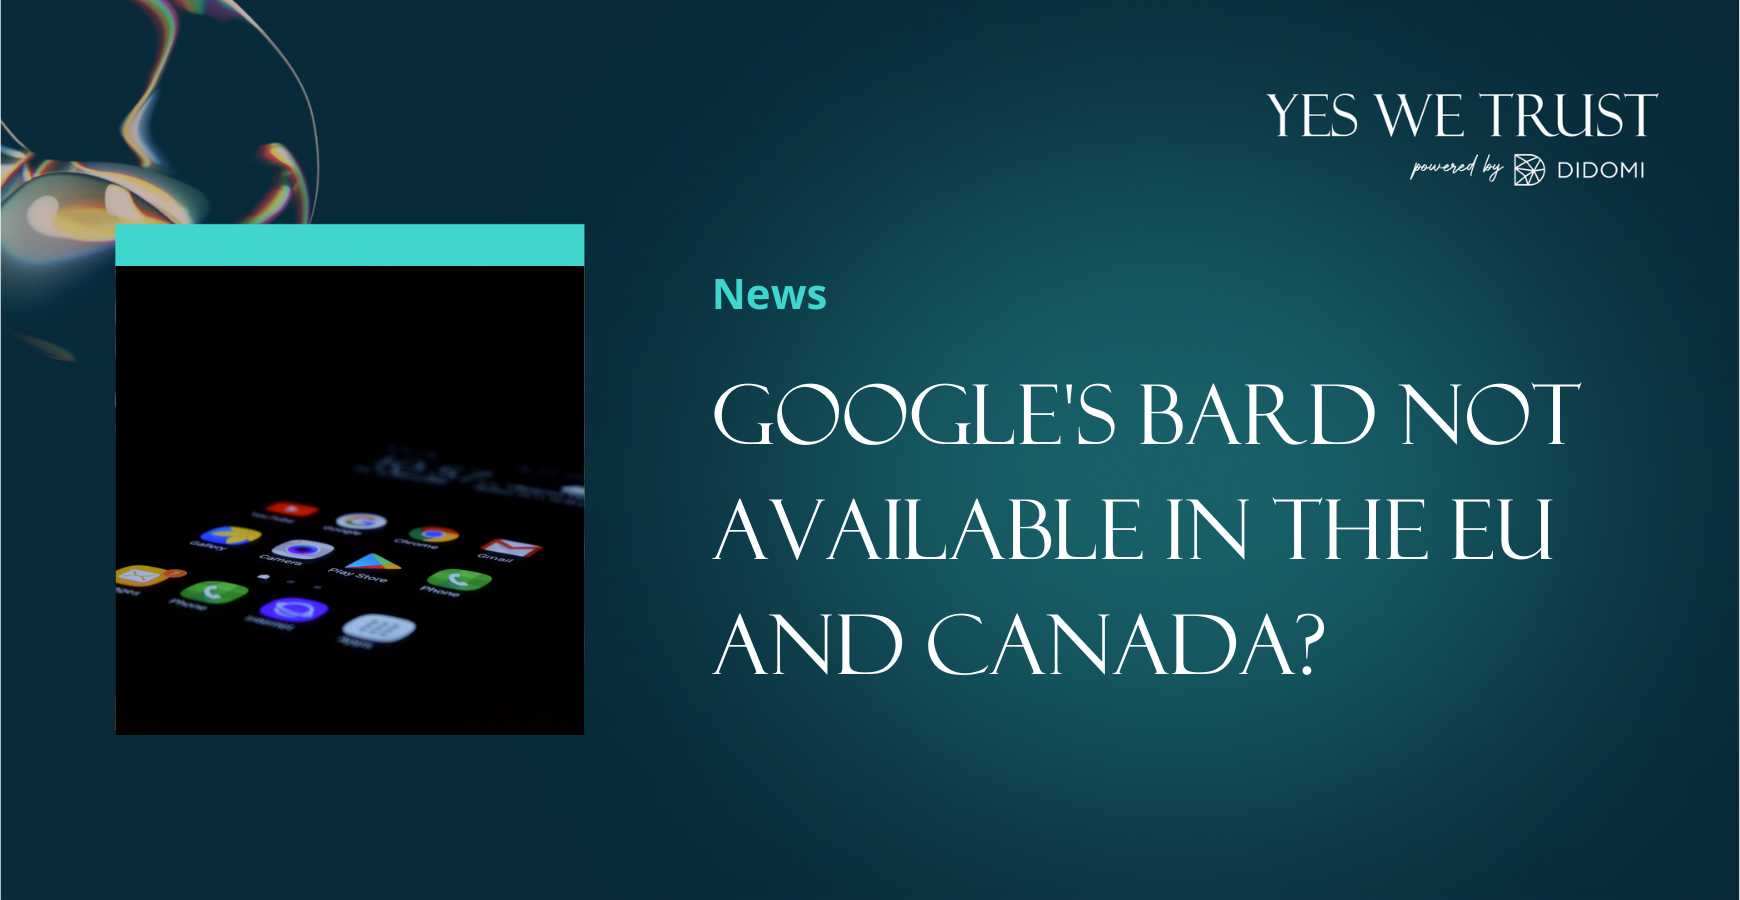 Google's Bard is now available - unless you're in the EU or Canada